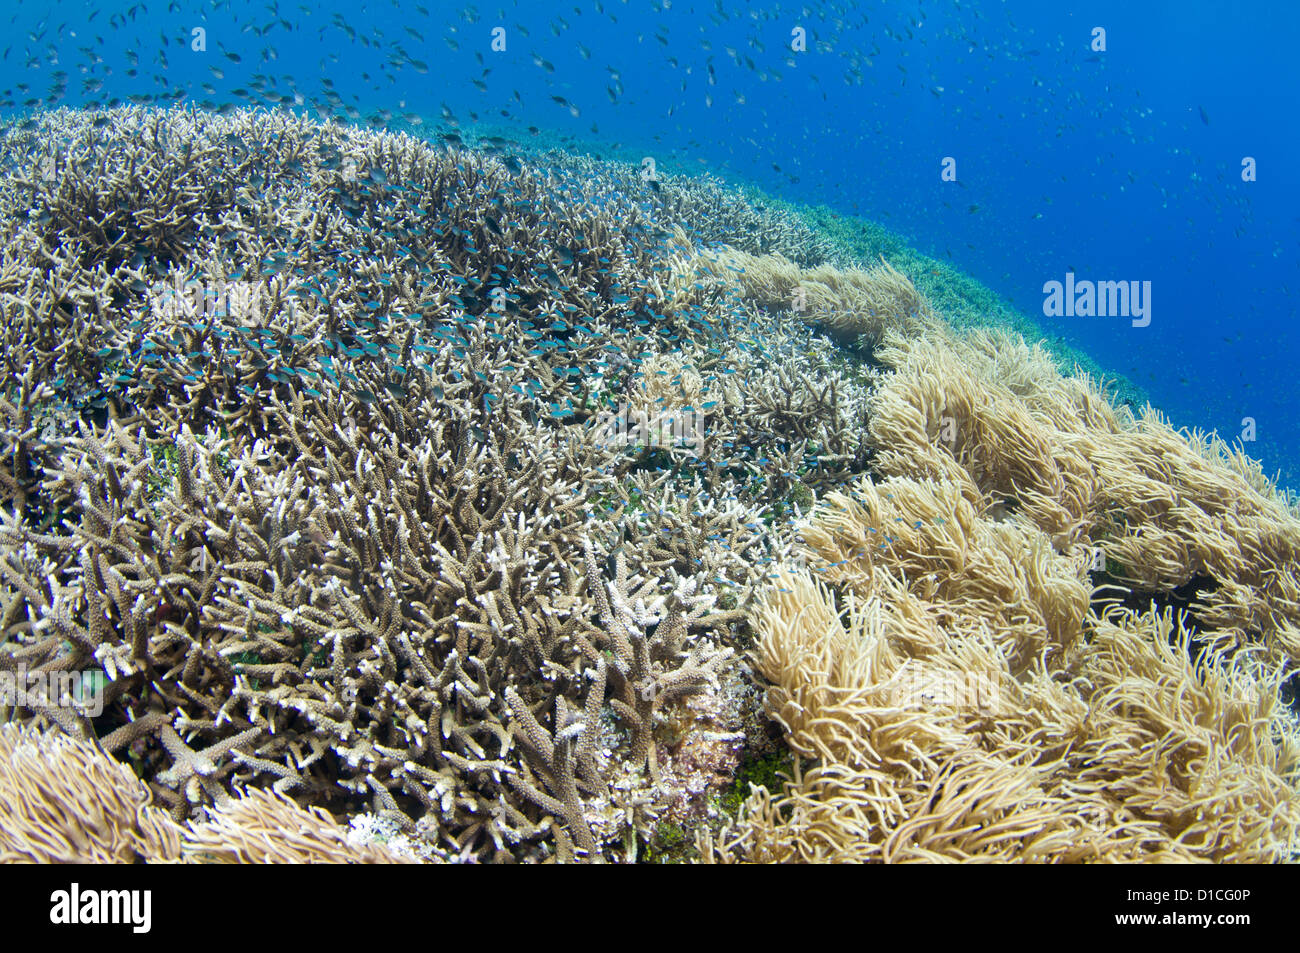 A hard coral garden with a variety of different hard corals including table, branching, cabbage or lettuce, and staghorn Stock Photo